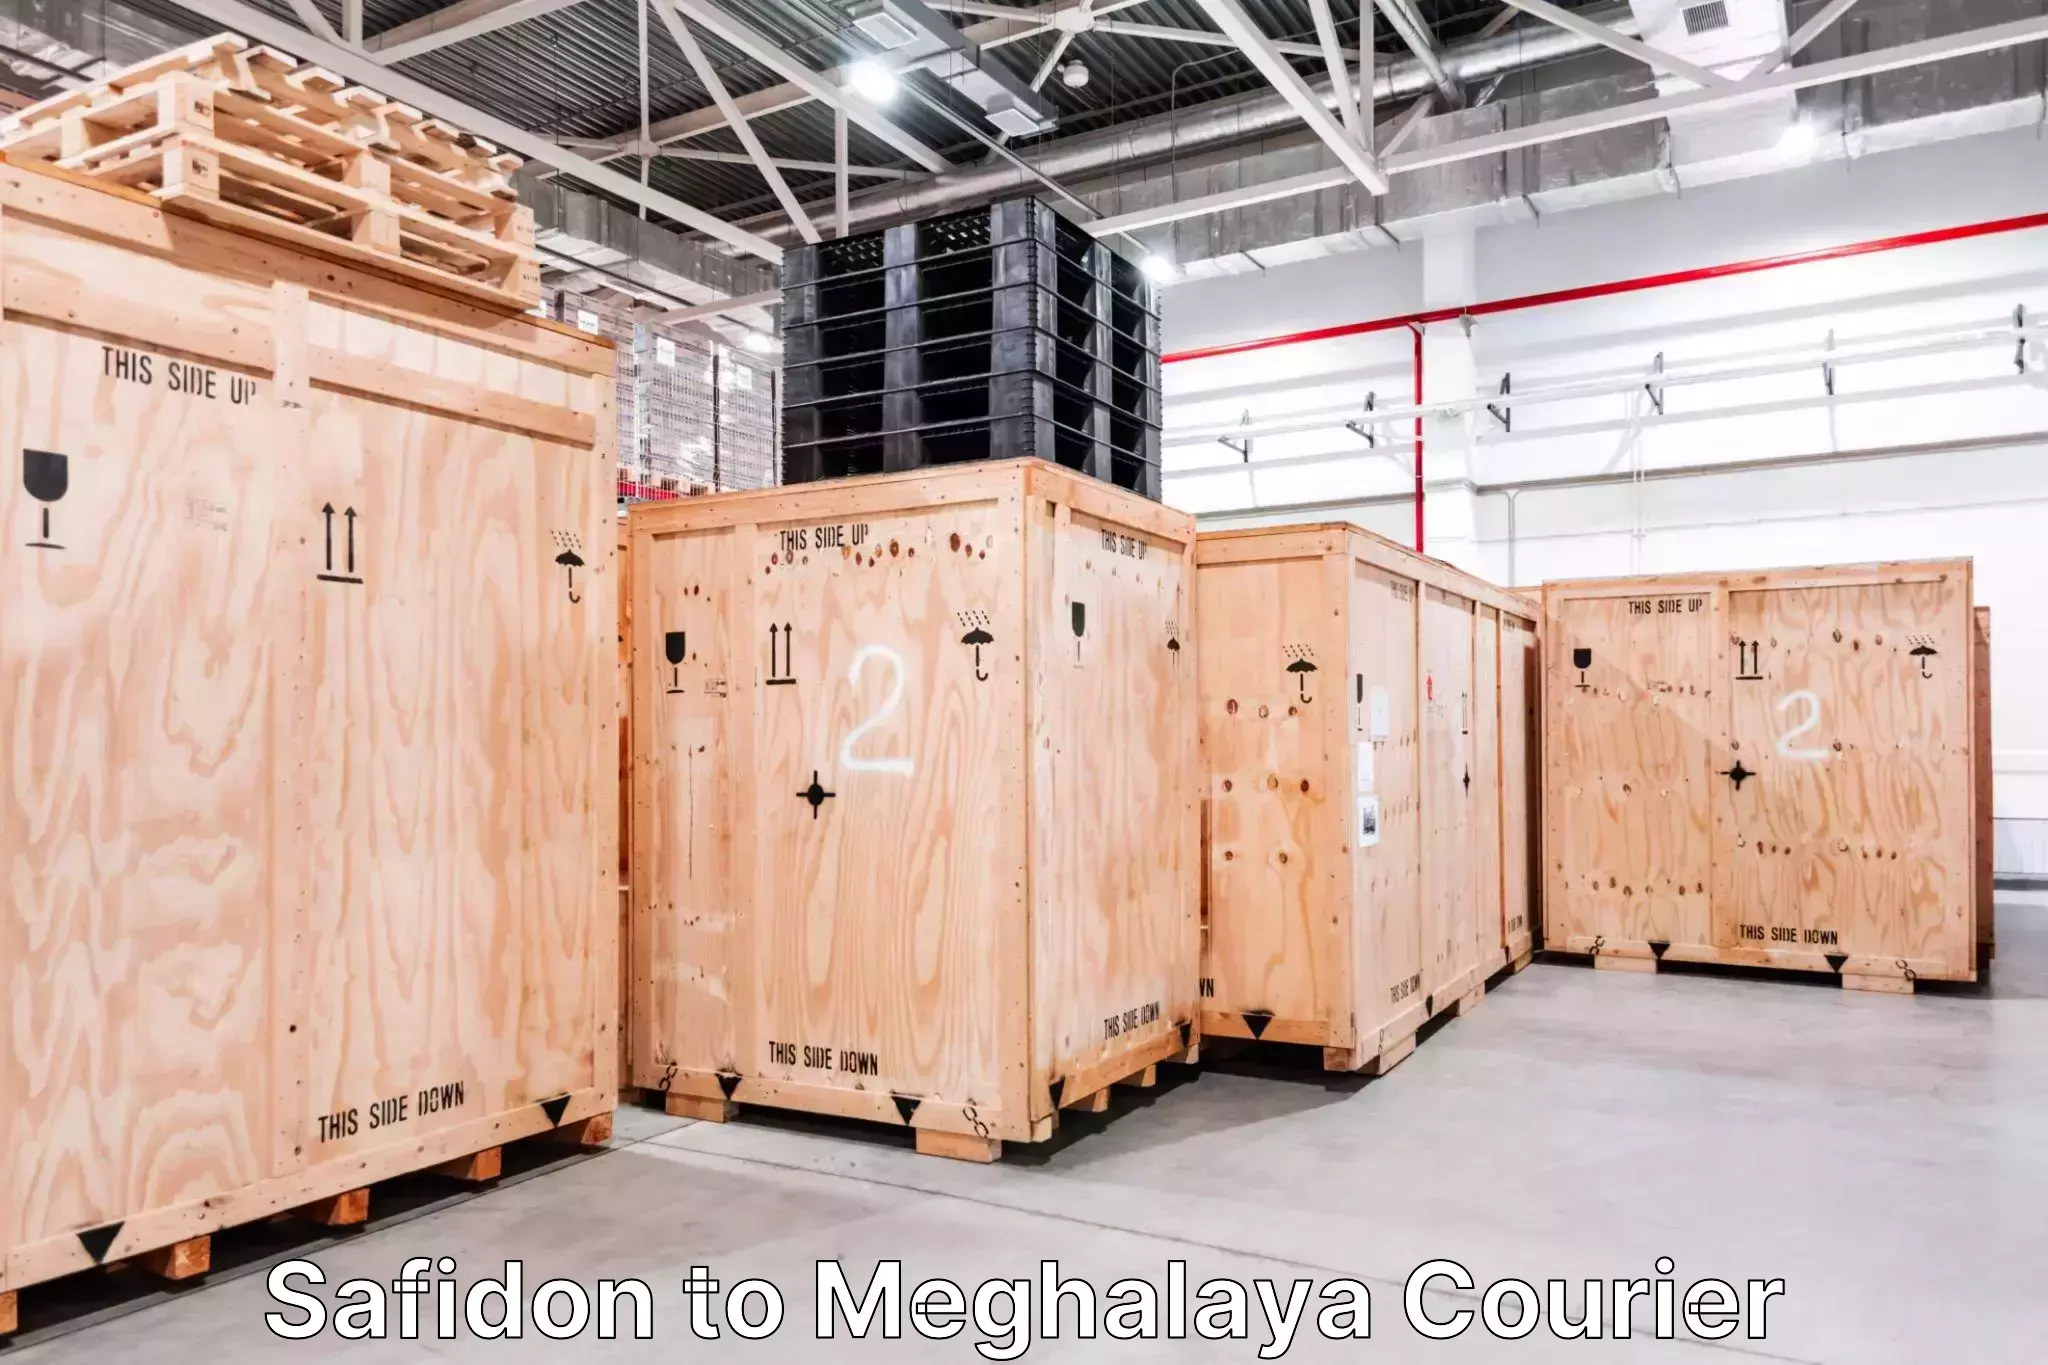 Luggage transport consultancy Safidon to Tura